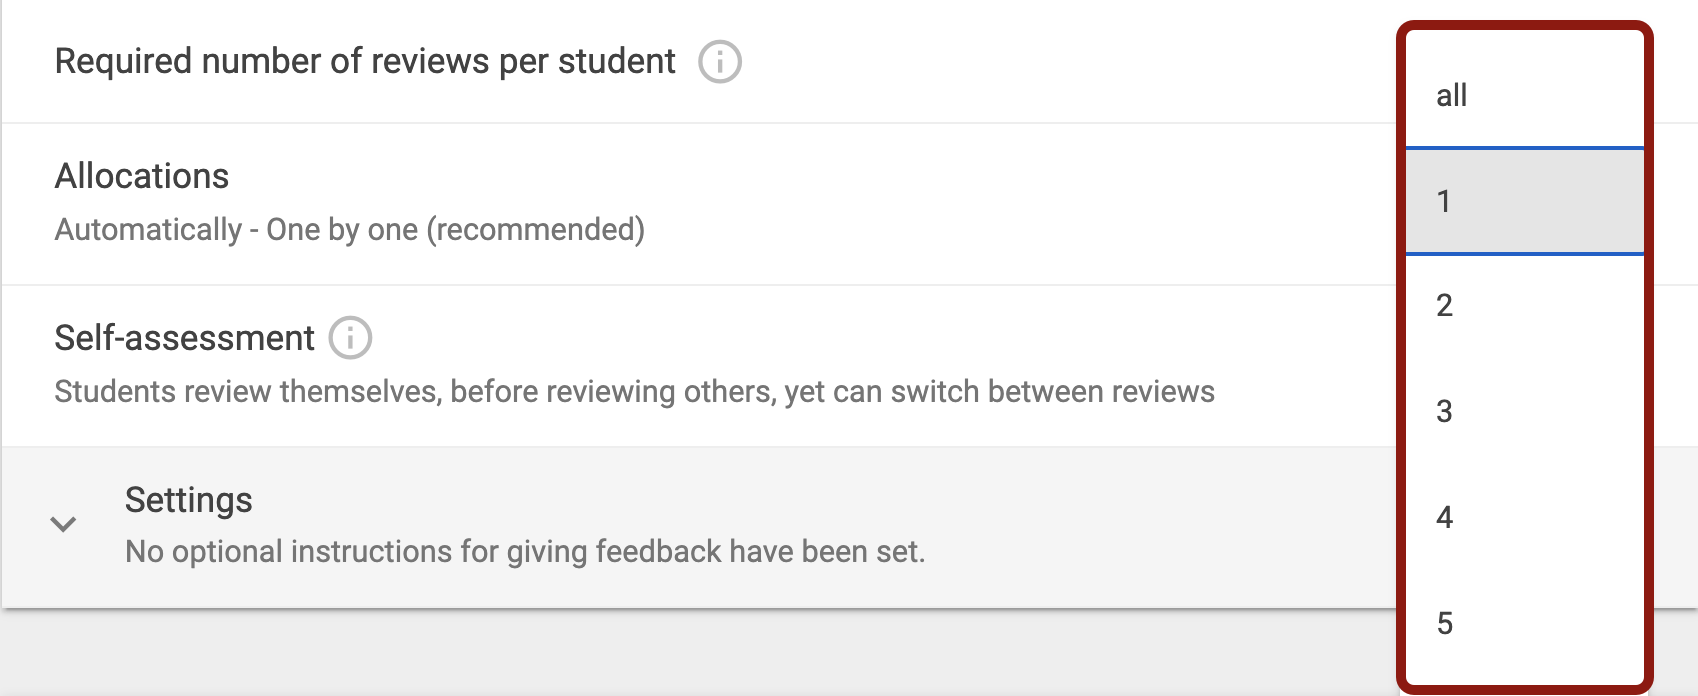 Set the required number of reviews per student